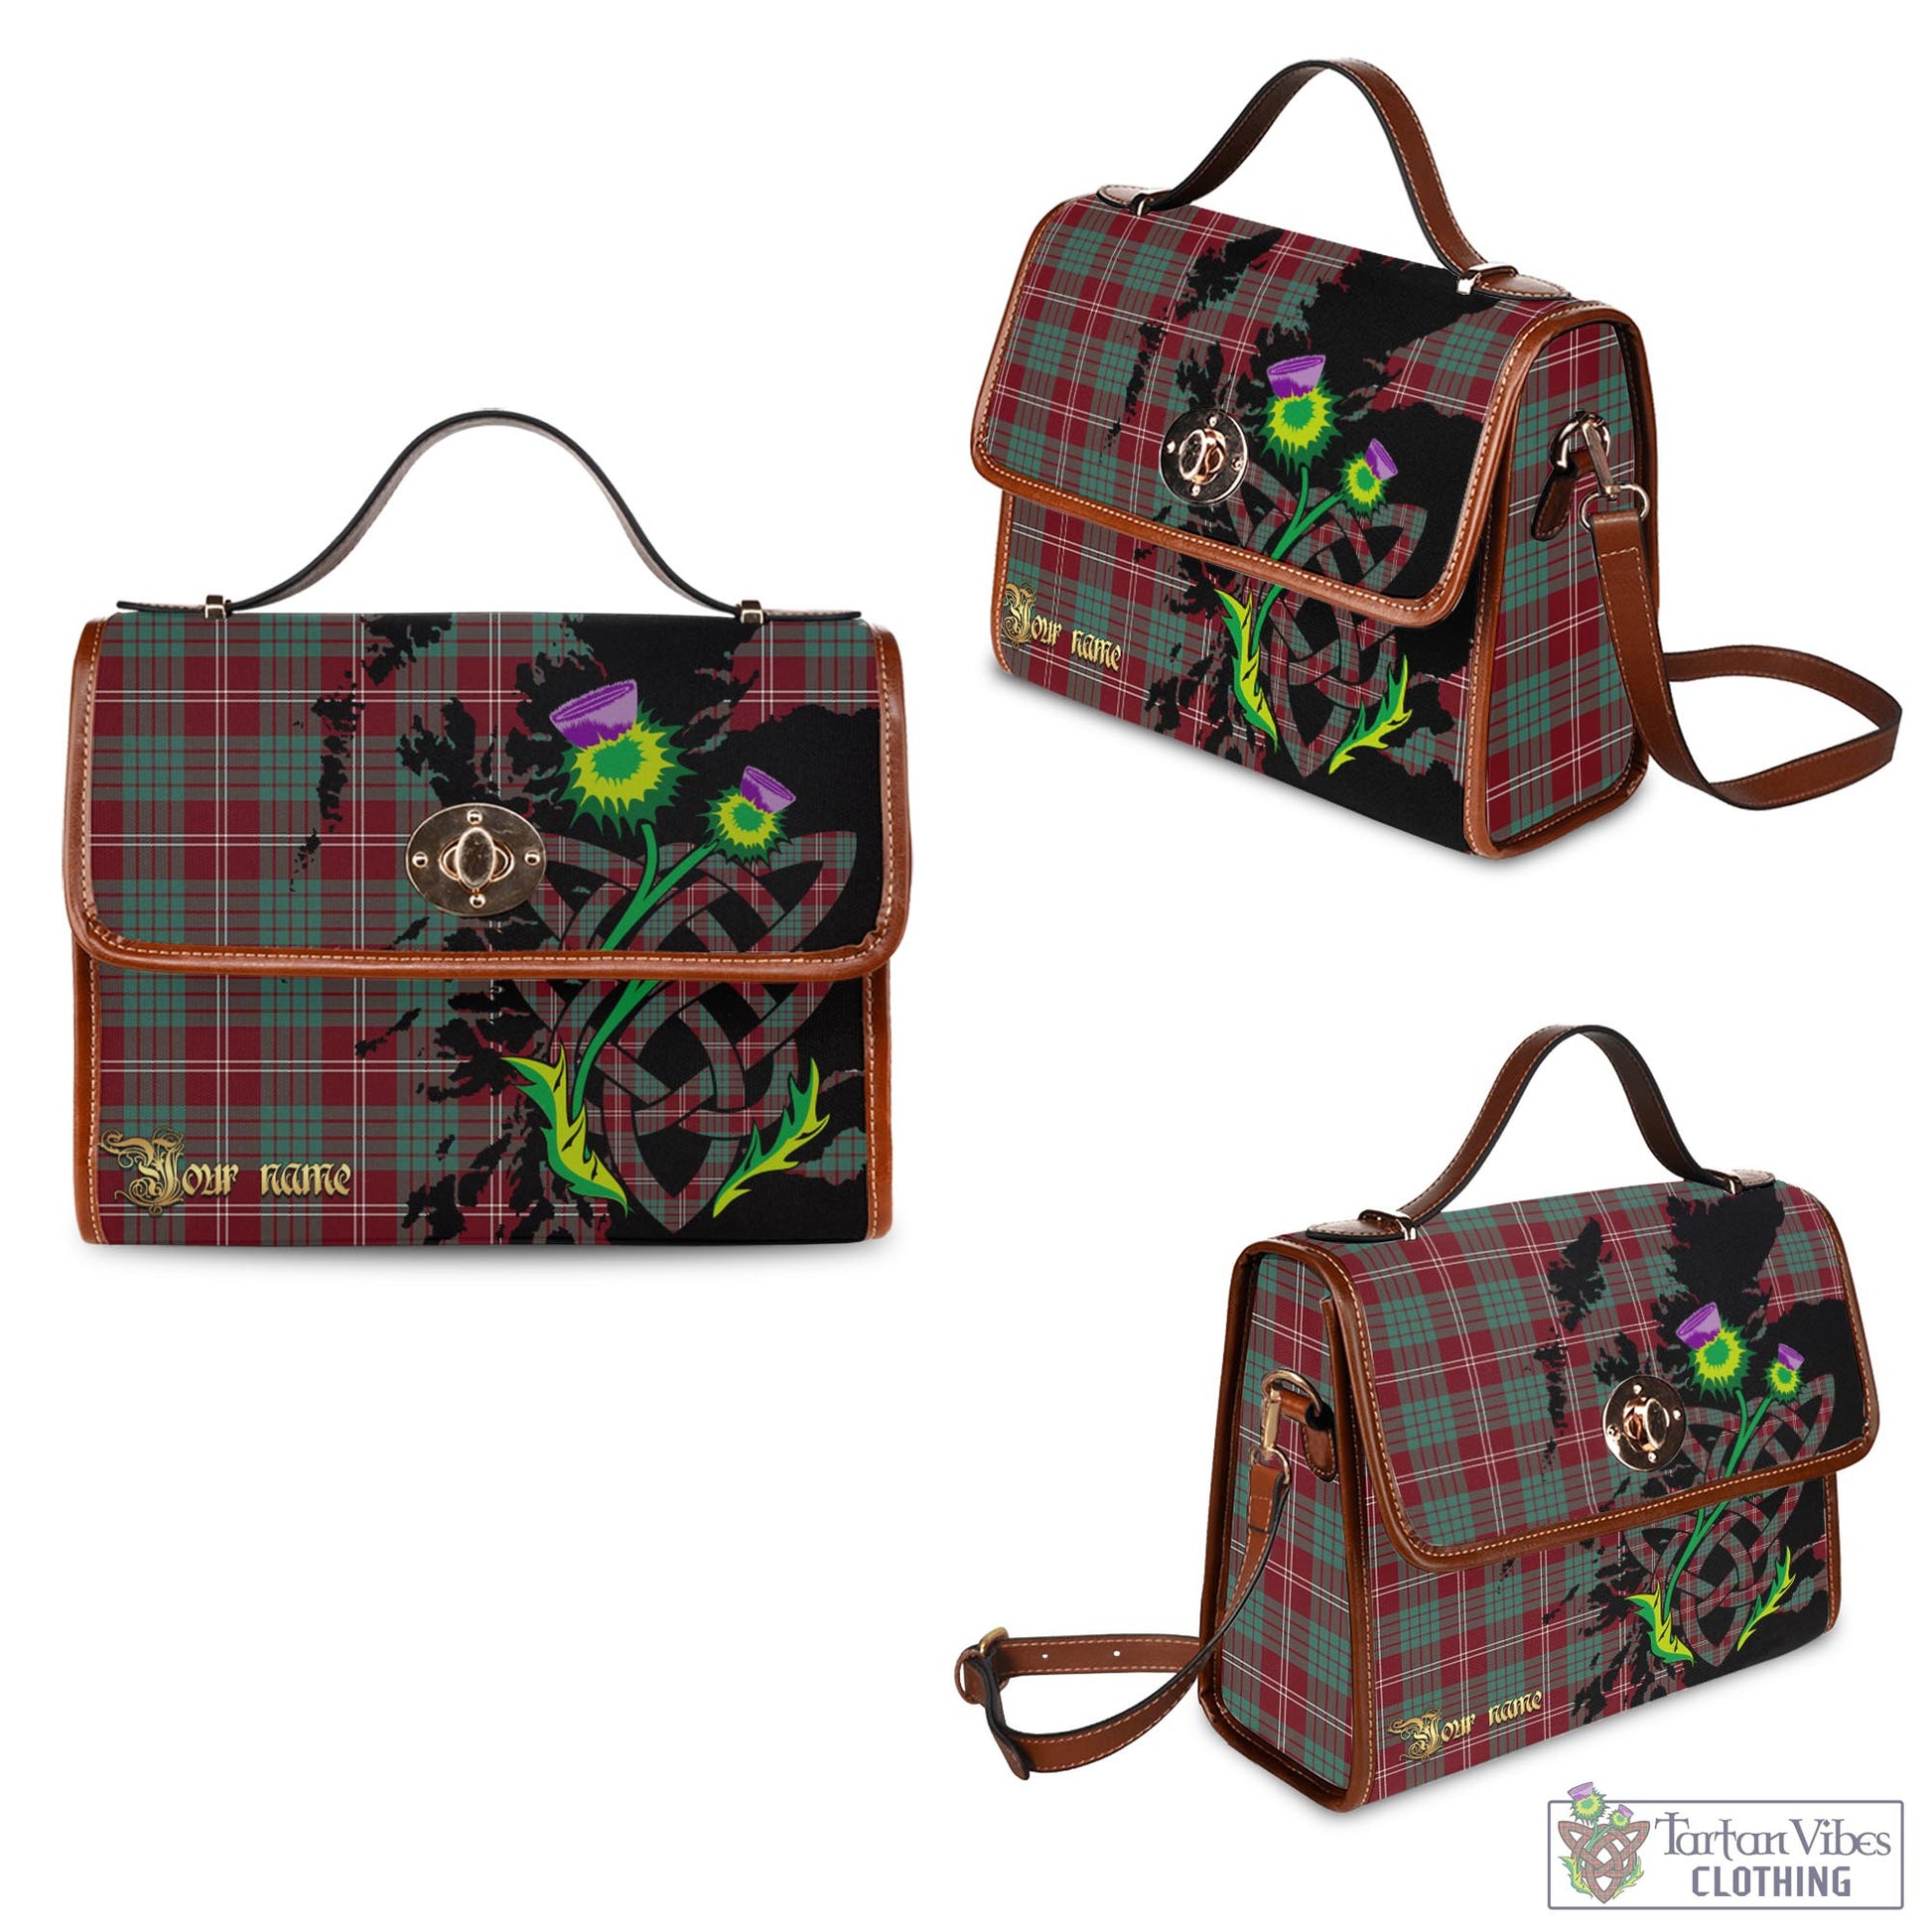 Tartan Vibes Clothing Crawford Modern Tartan Waterproof Canvas Bag with Scotland Map and Thistle Celtic Accents